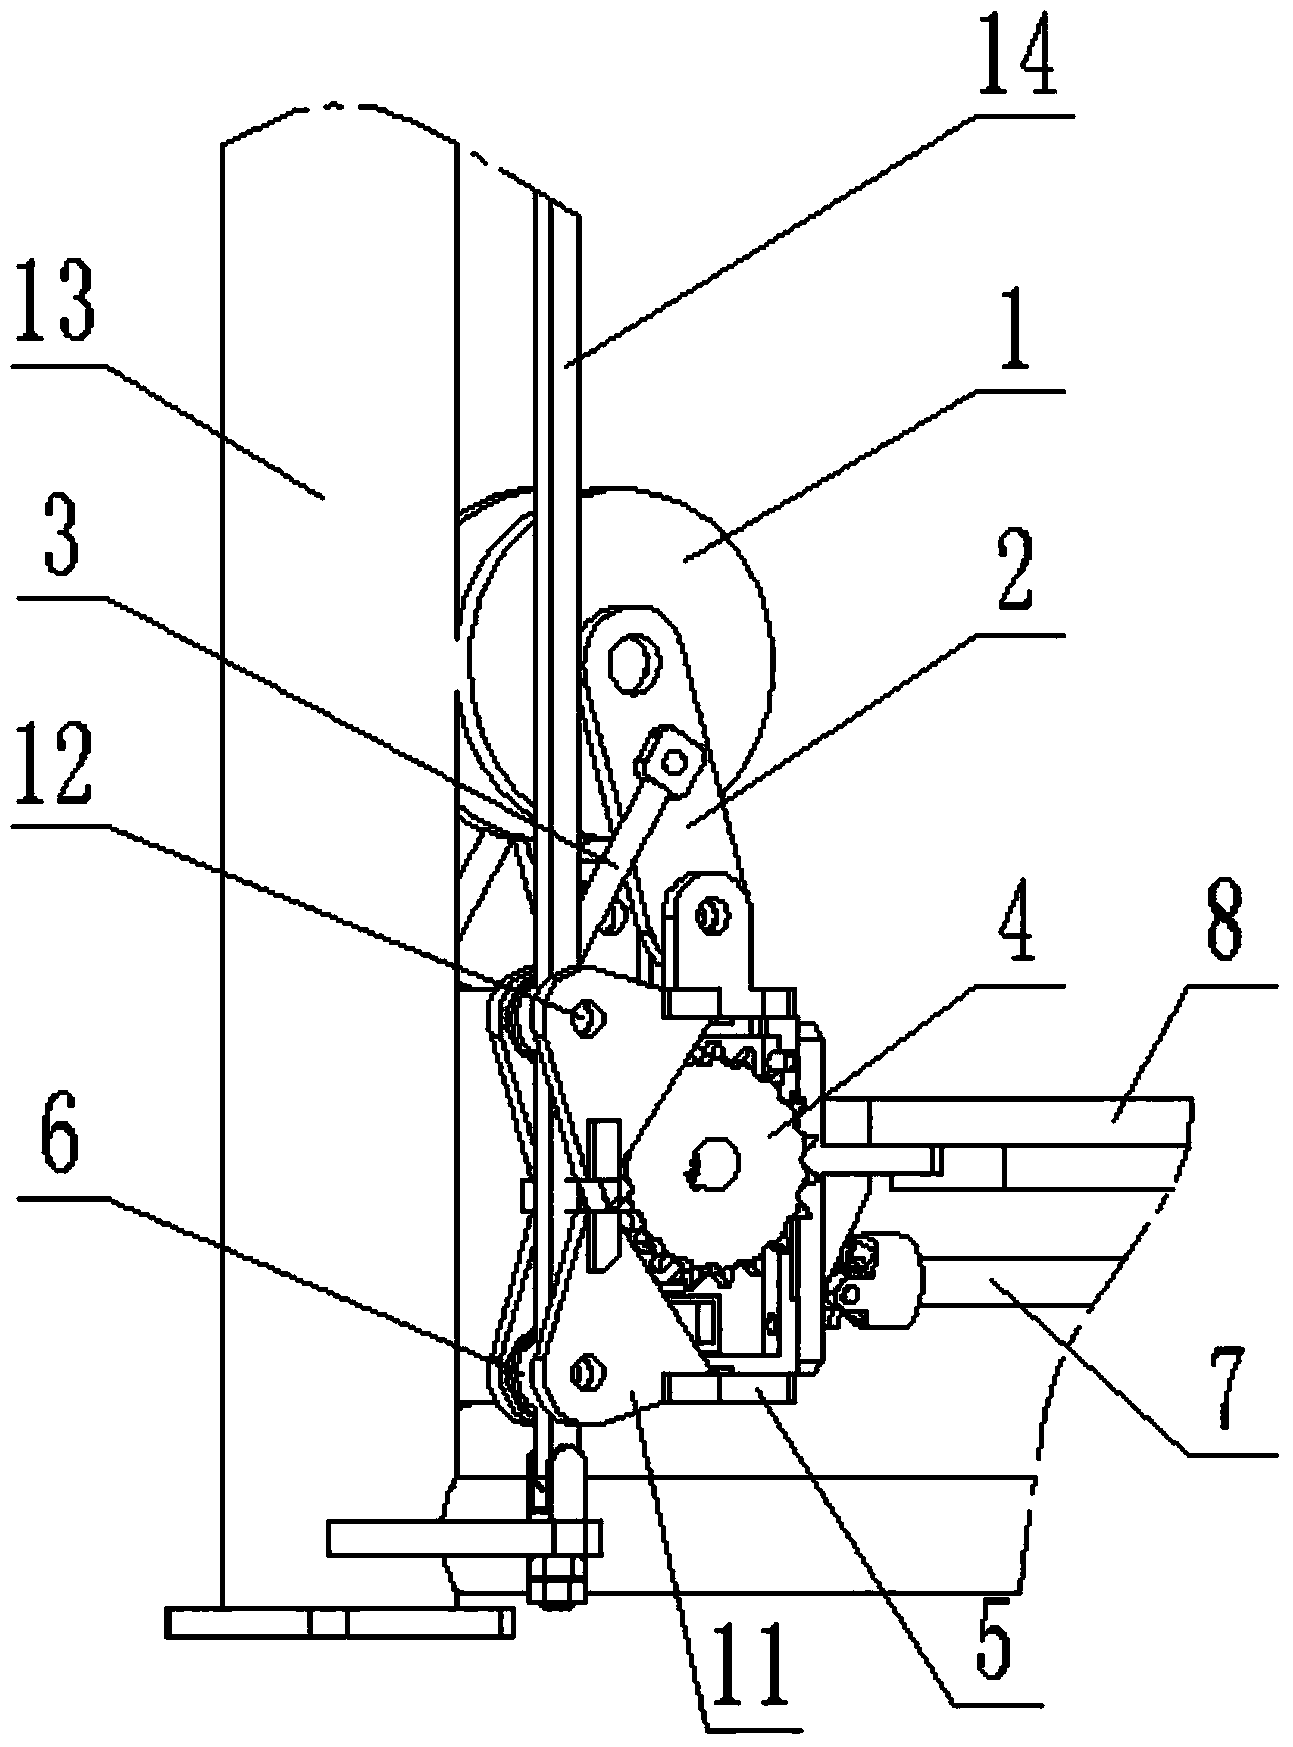 Three-upright-post portal support frame climbing device